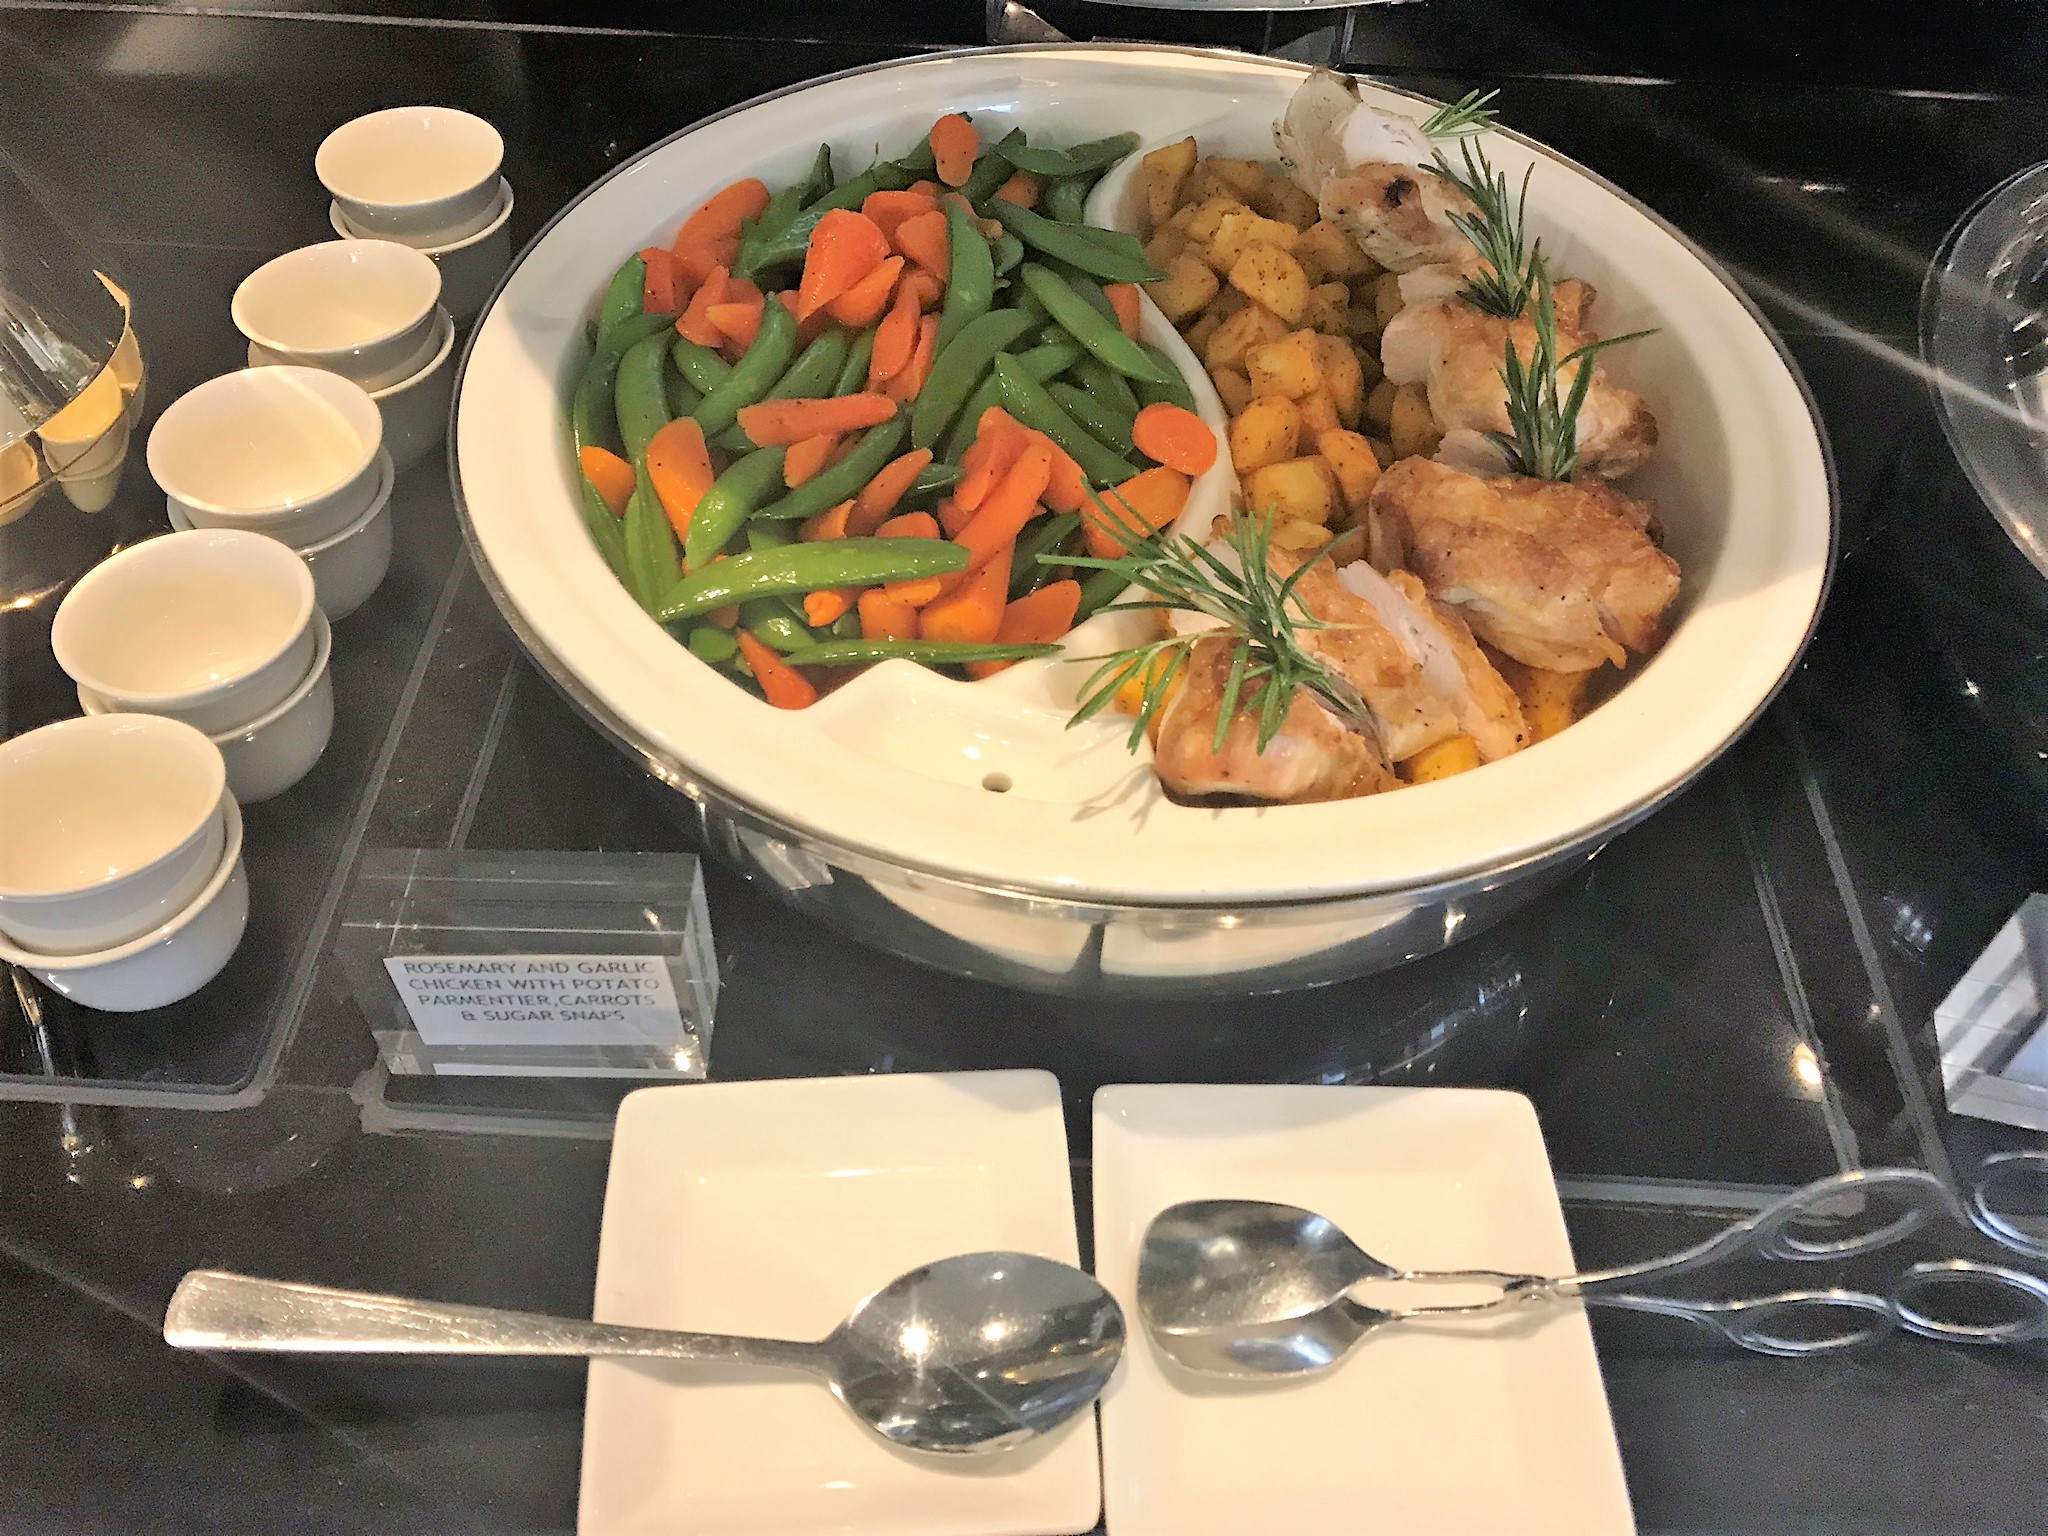 Etihad First and Business class Lounge London Heathrow Terminal 4 review